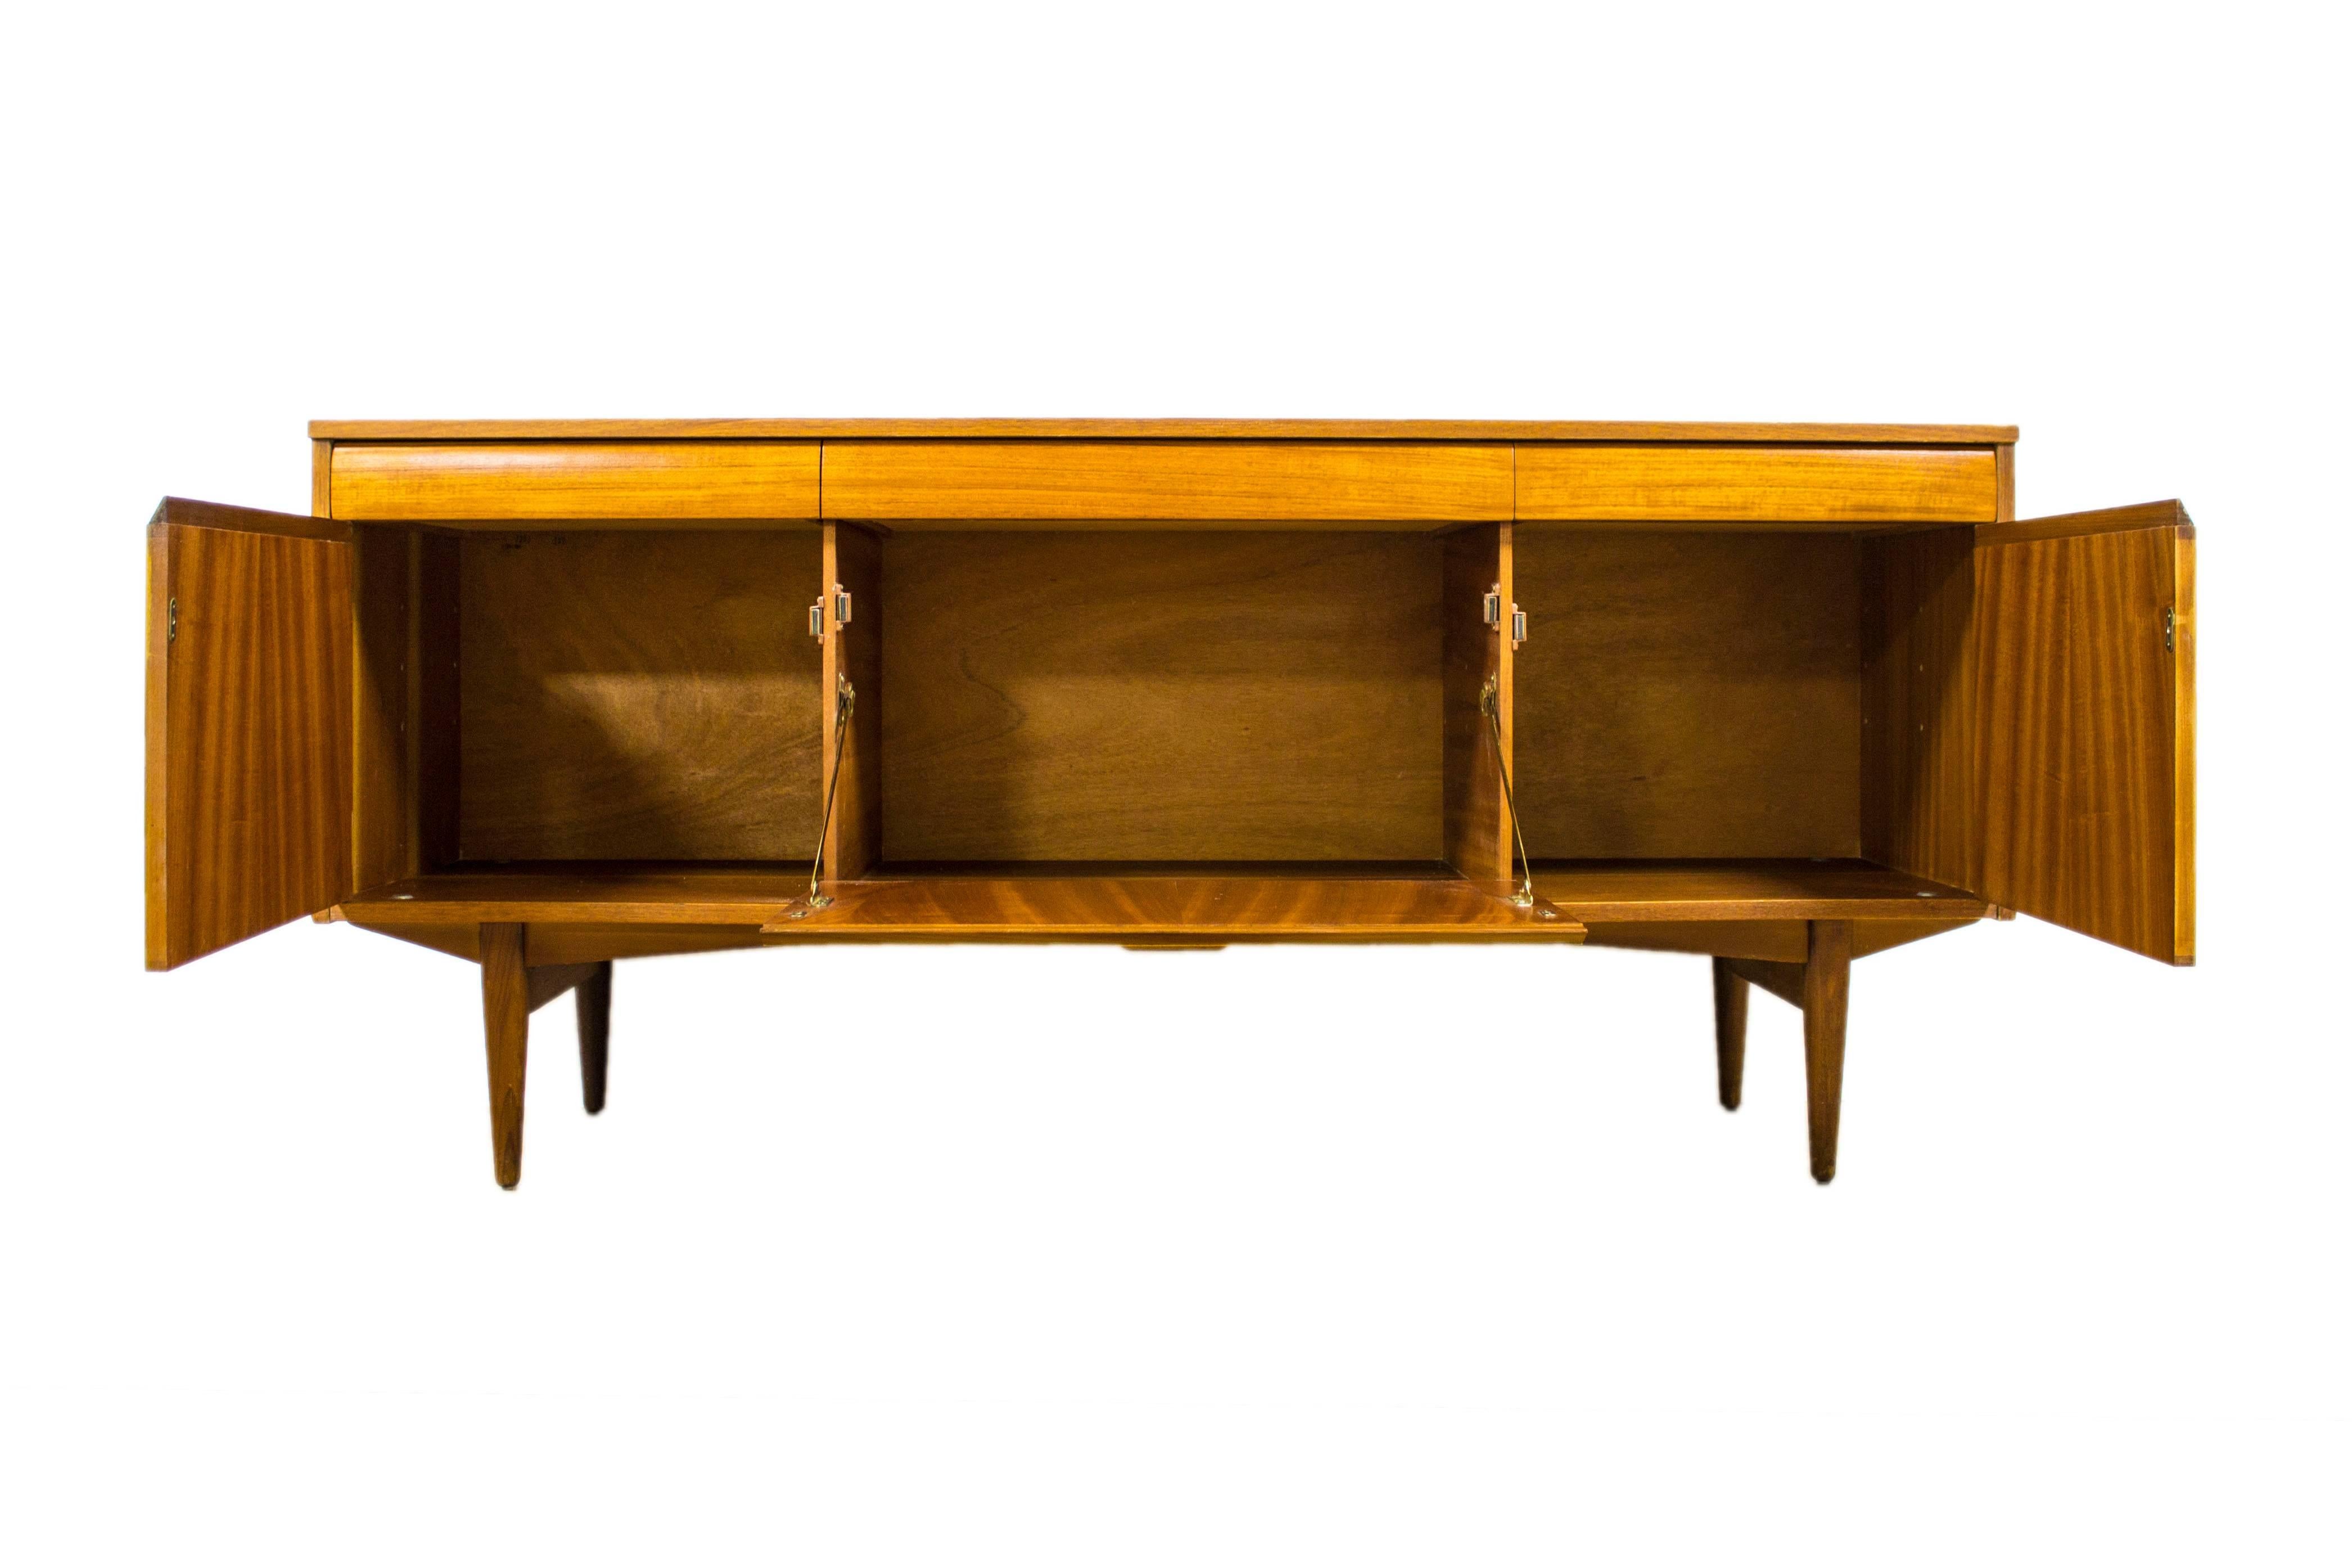 Greaves & Thomas are renowned for their innovative and stunning designs and this teak sideboard with its intricate inset pulls is a wonderful example of how they brought exotic materials together to create stylish and highly practical